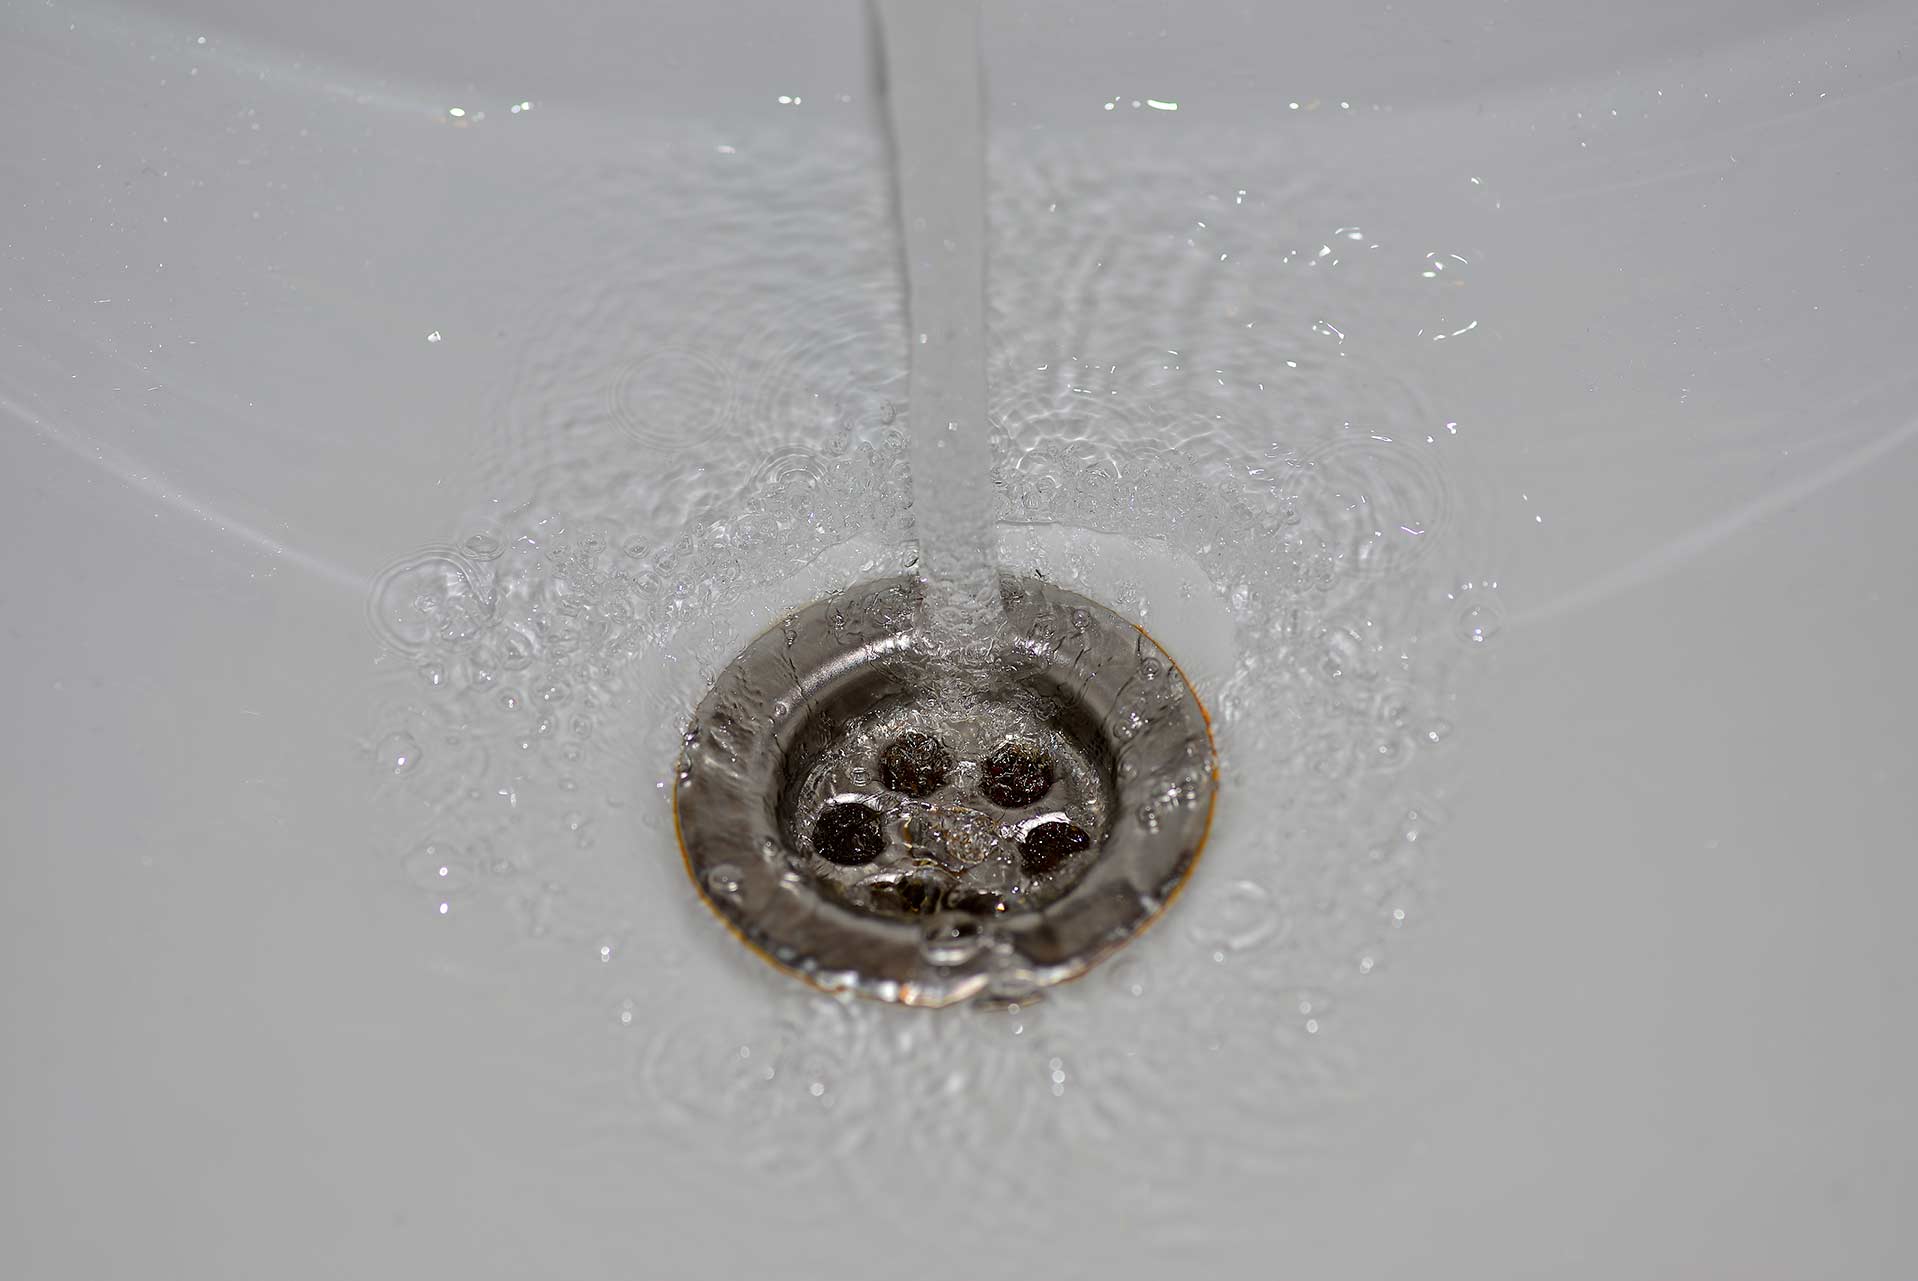 A2B Drains provides services to unblock blocked sinks and drains for properties in Abingdon.